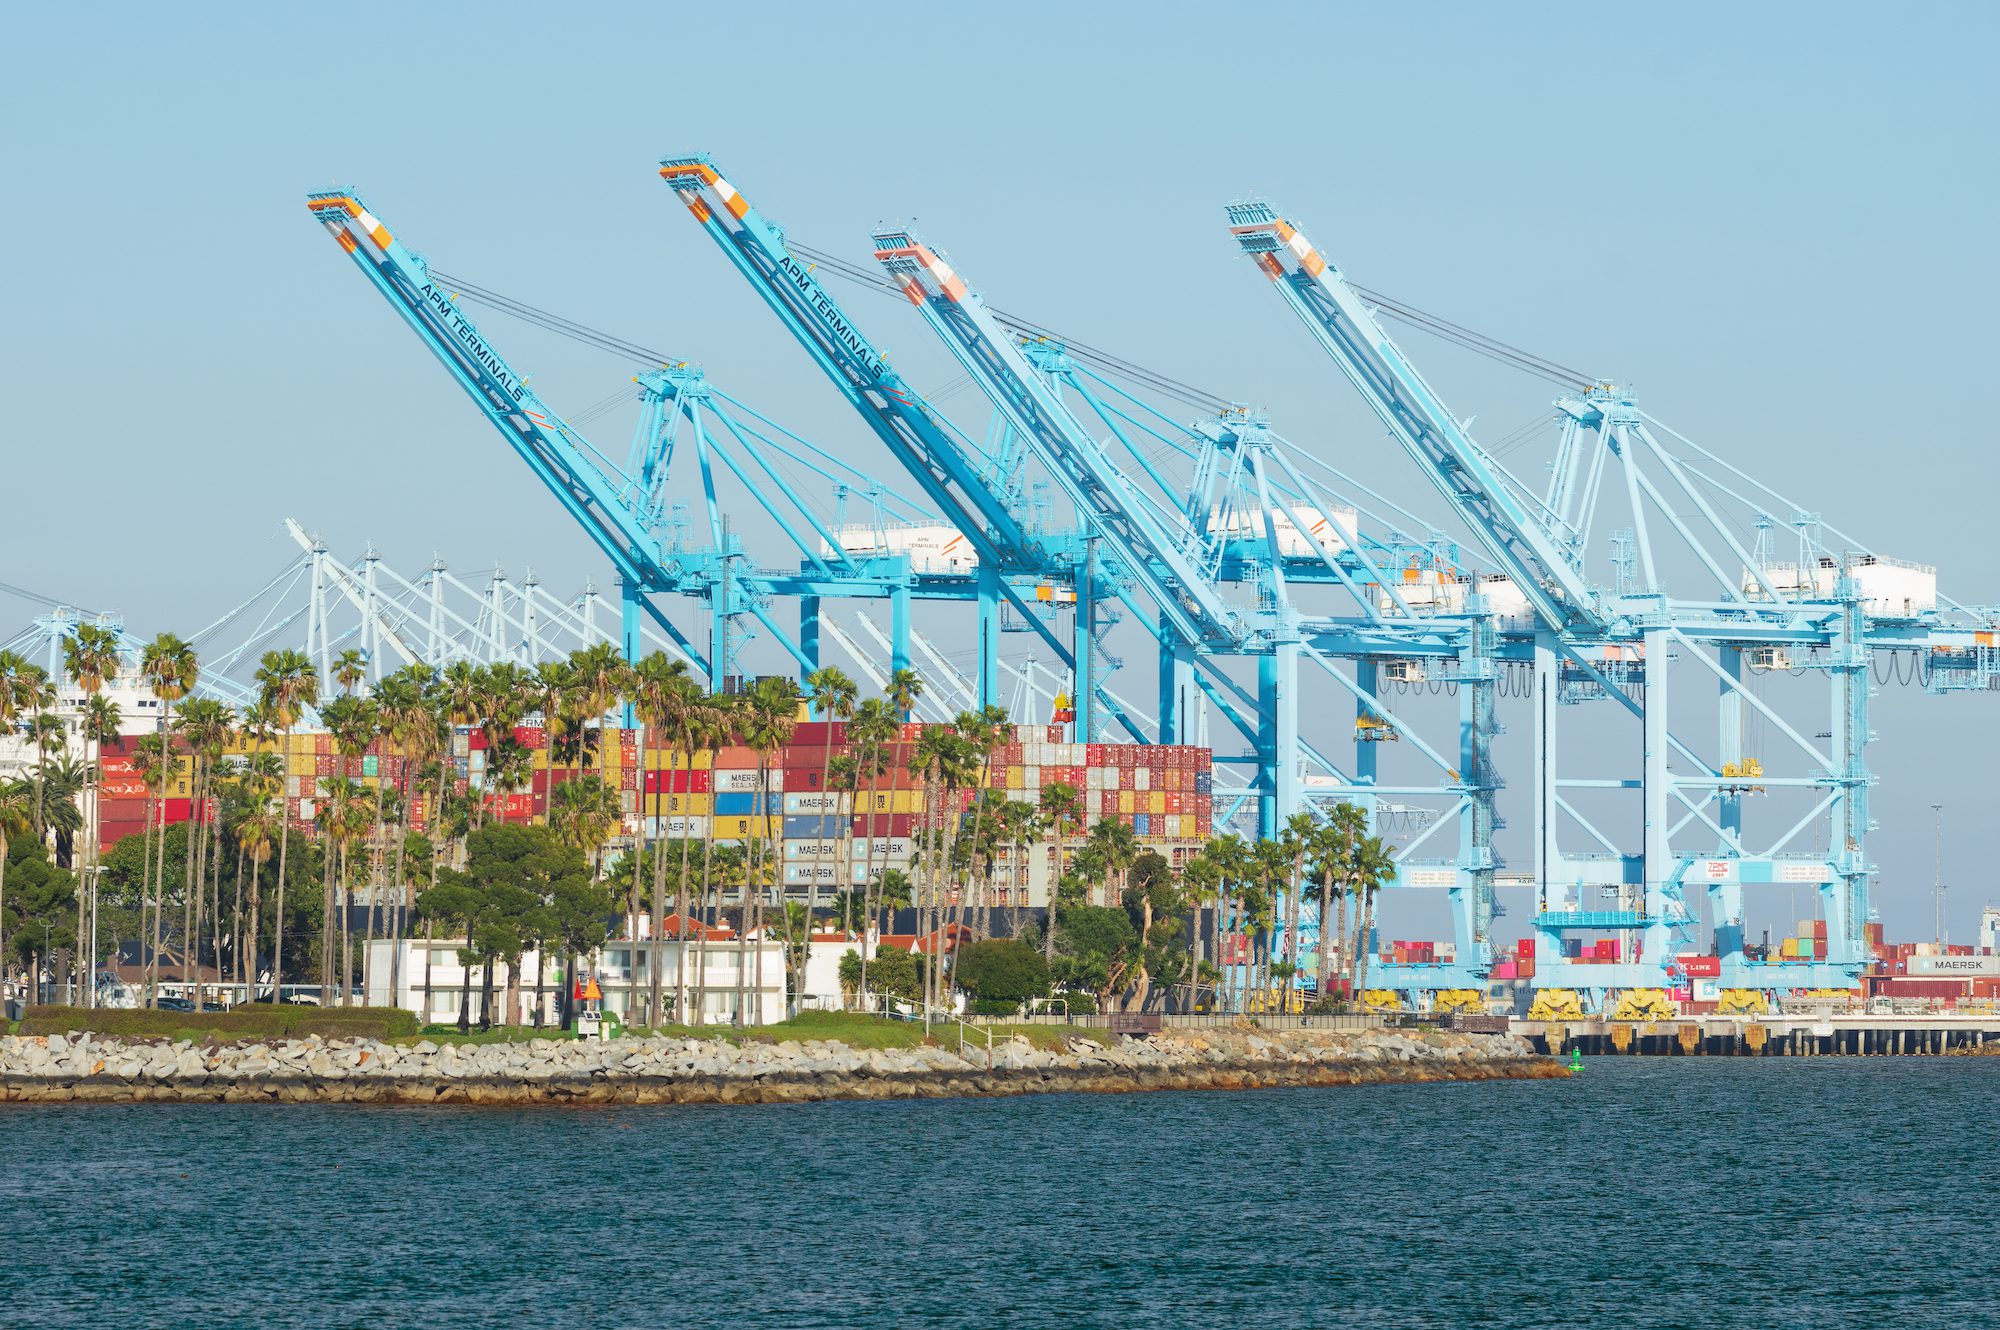 Man Falls to Death on Maersk Ship at Port of Los Angeles